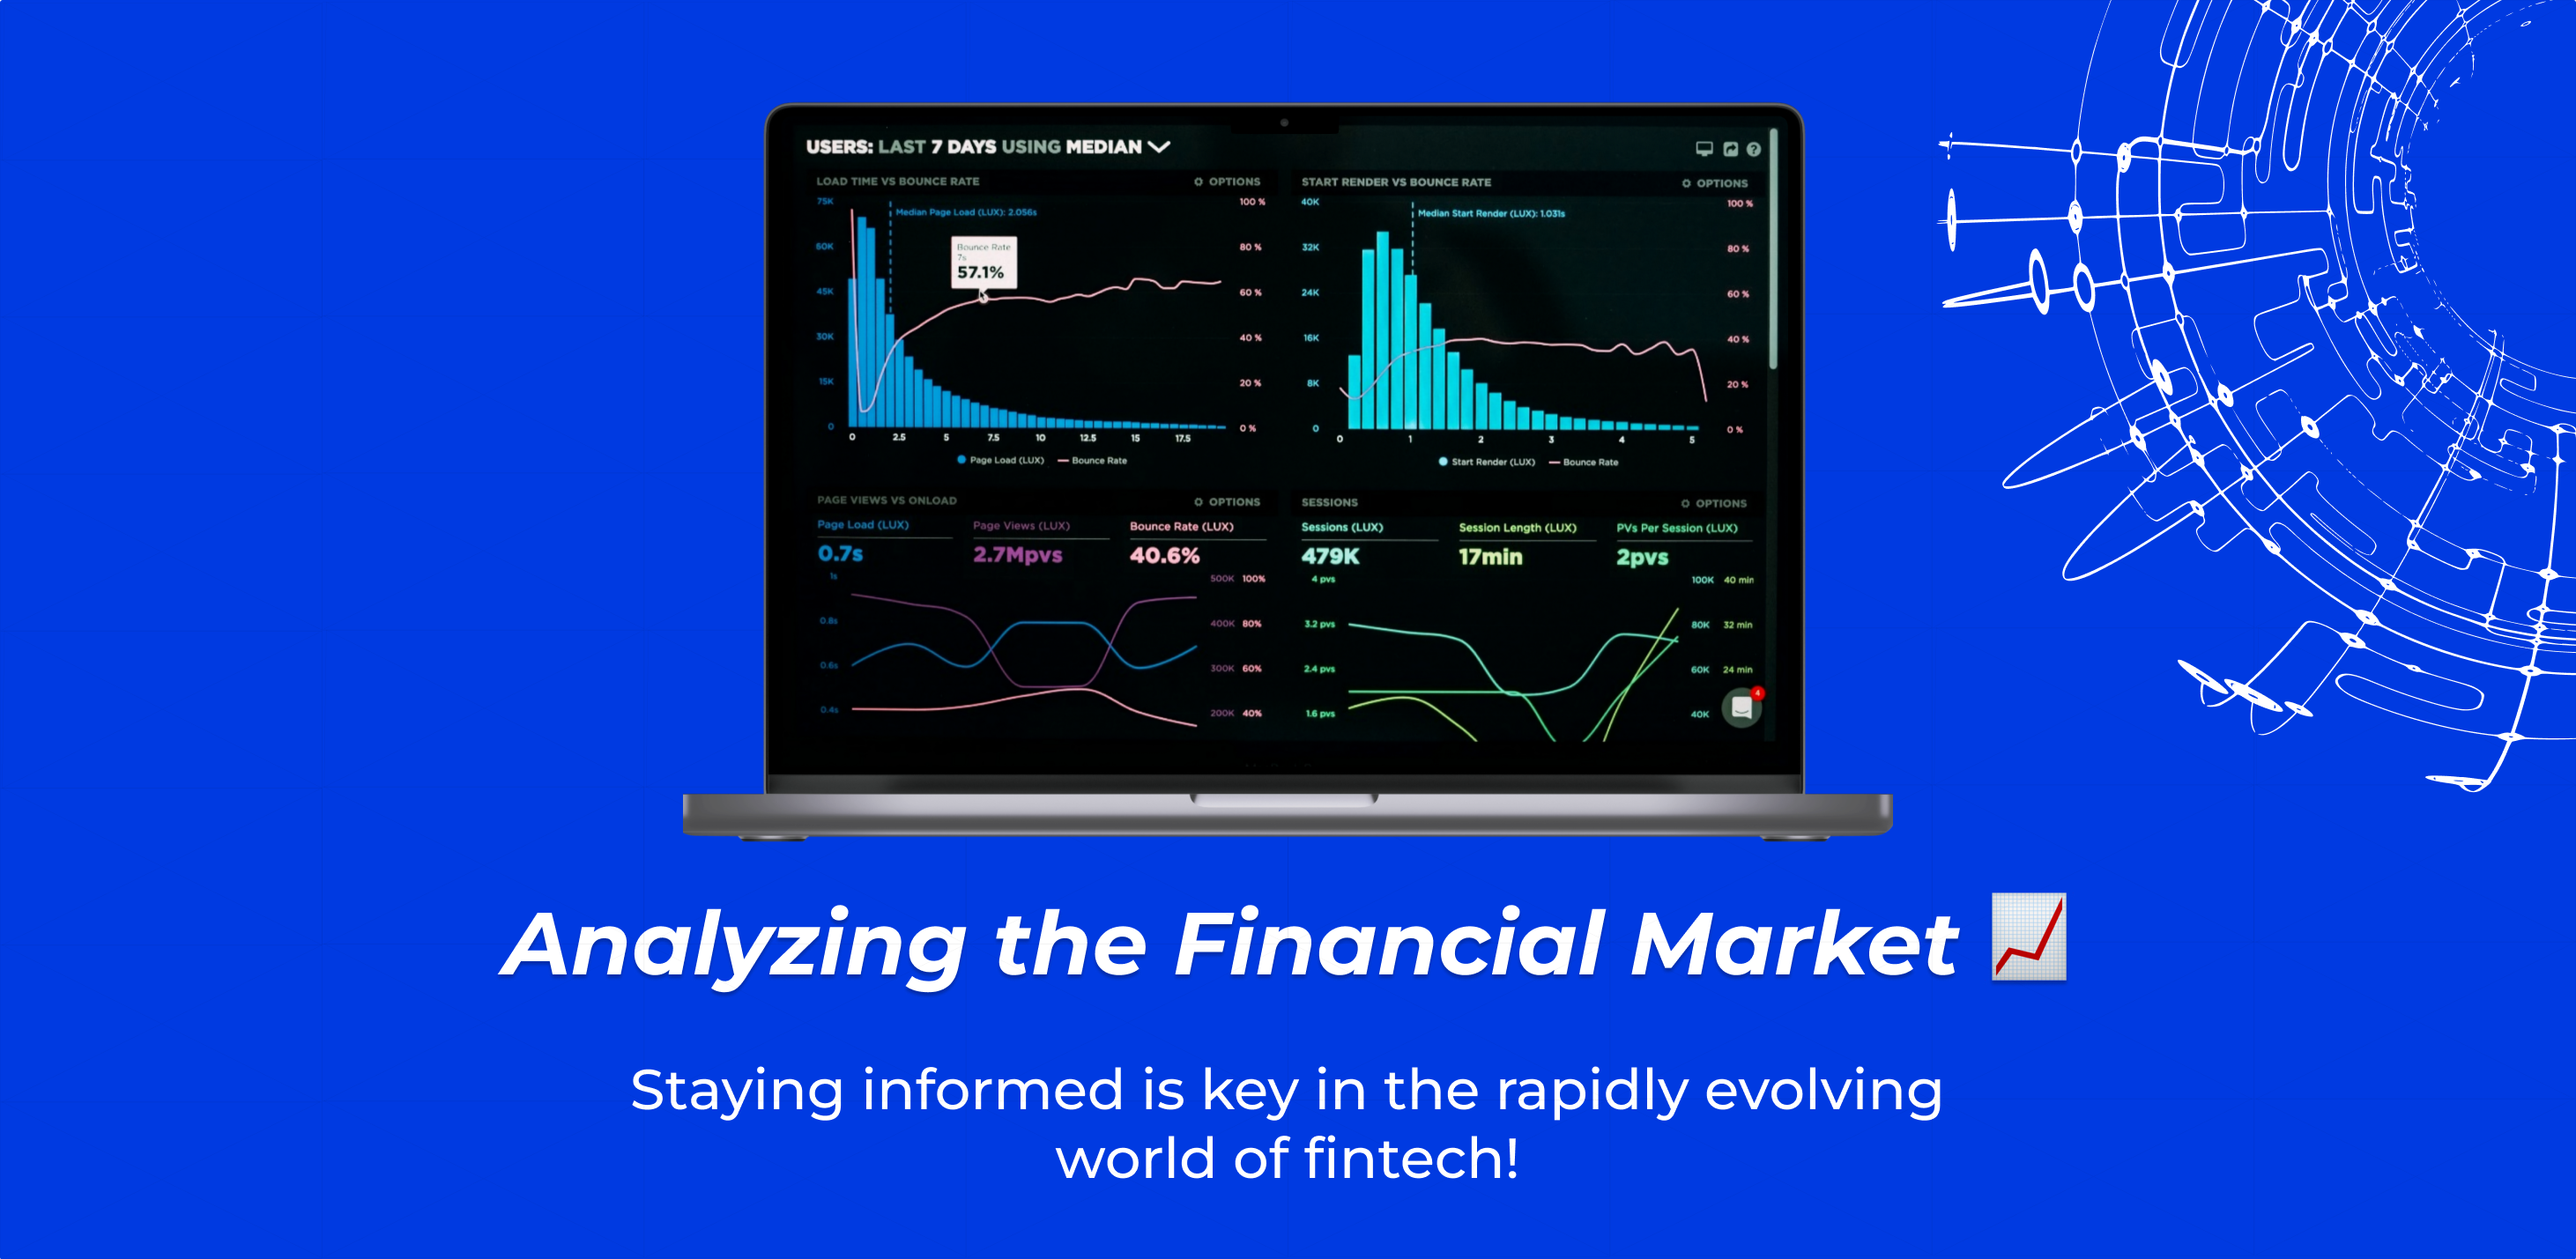 Analyzing the Financial Market